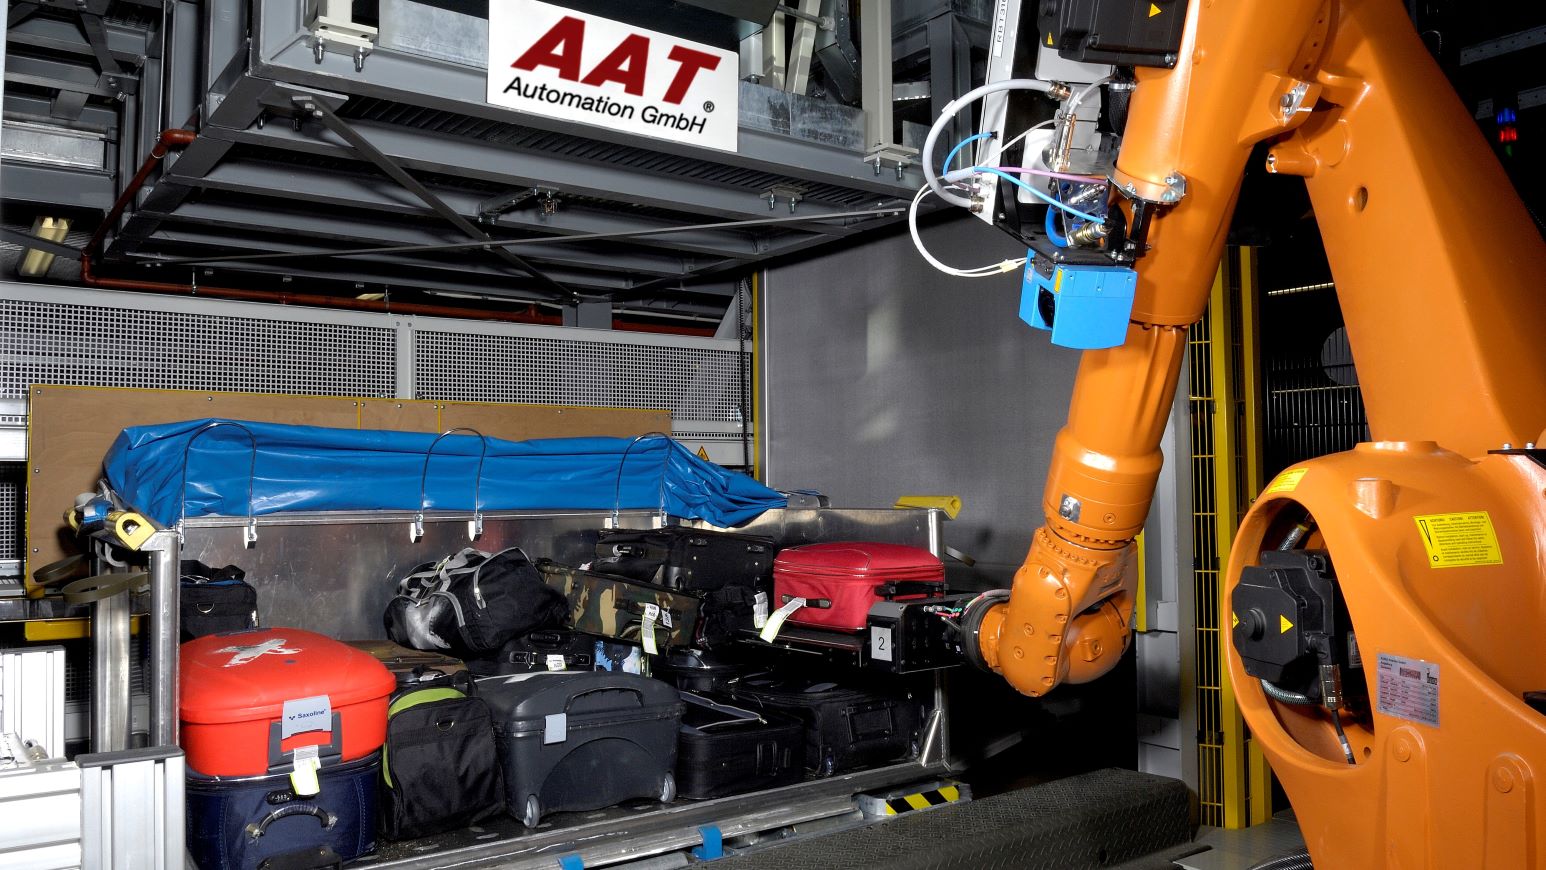 AAT Automation GmbH - Airport Technology